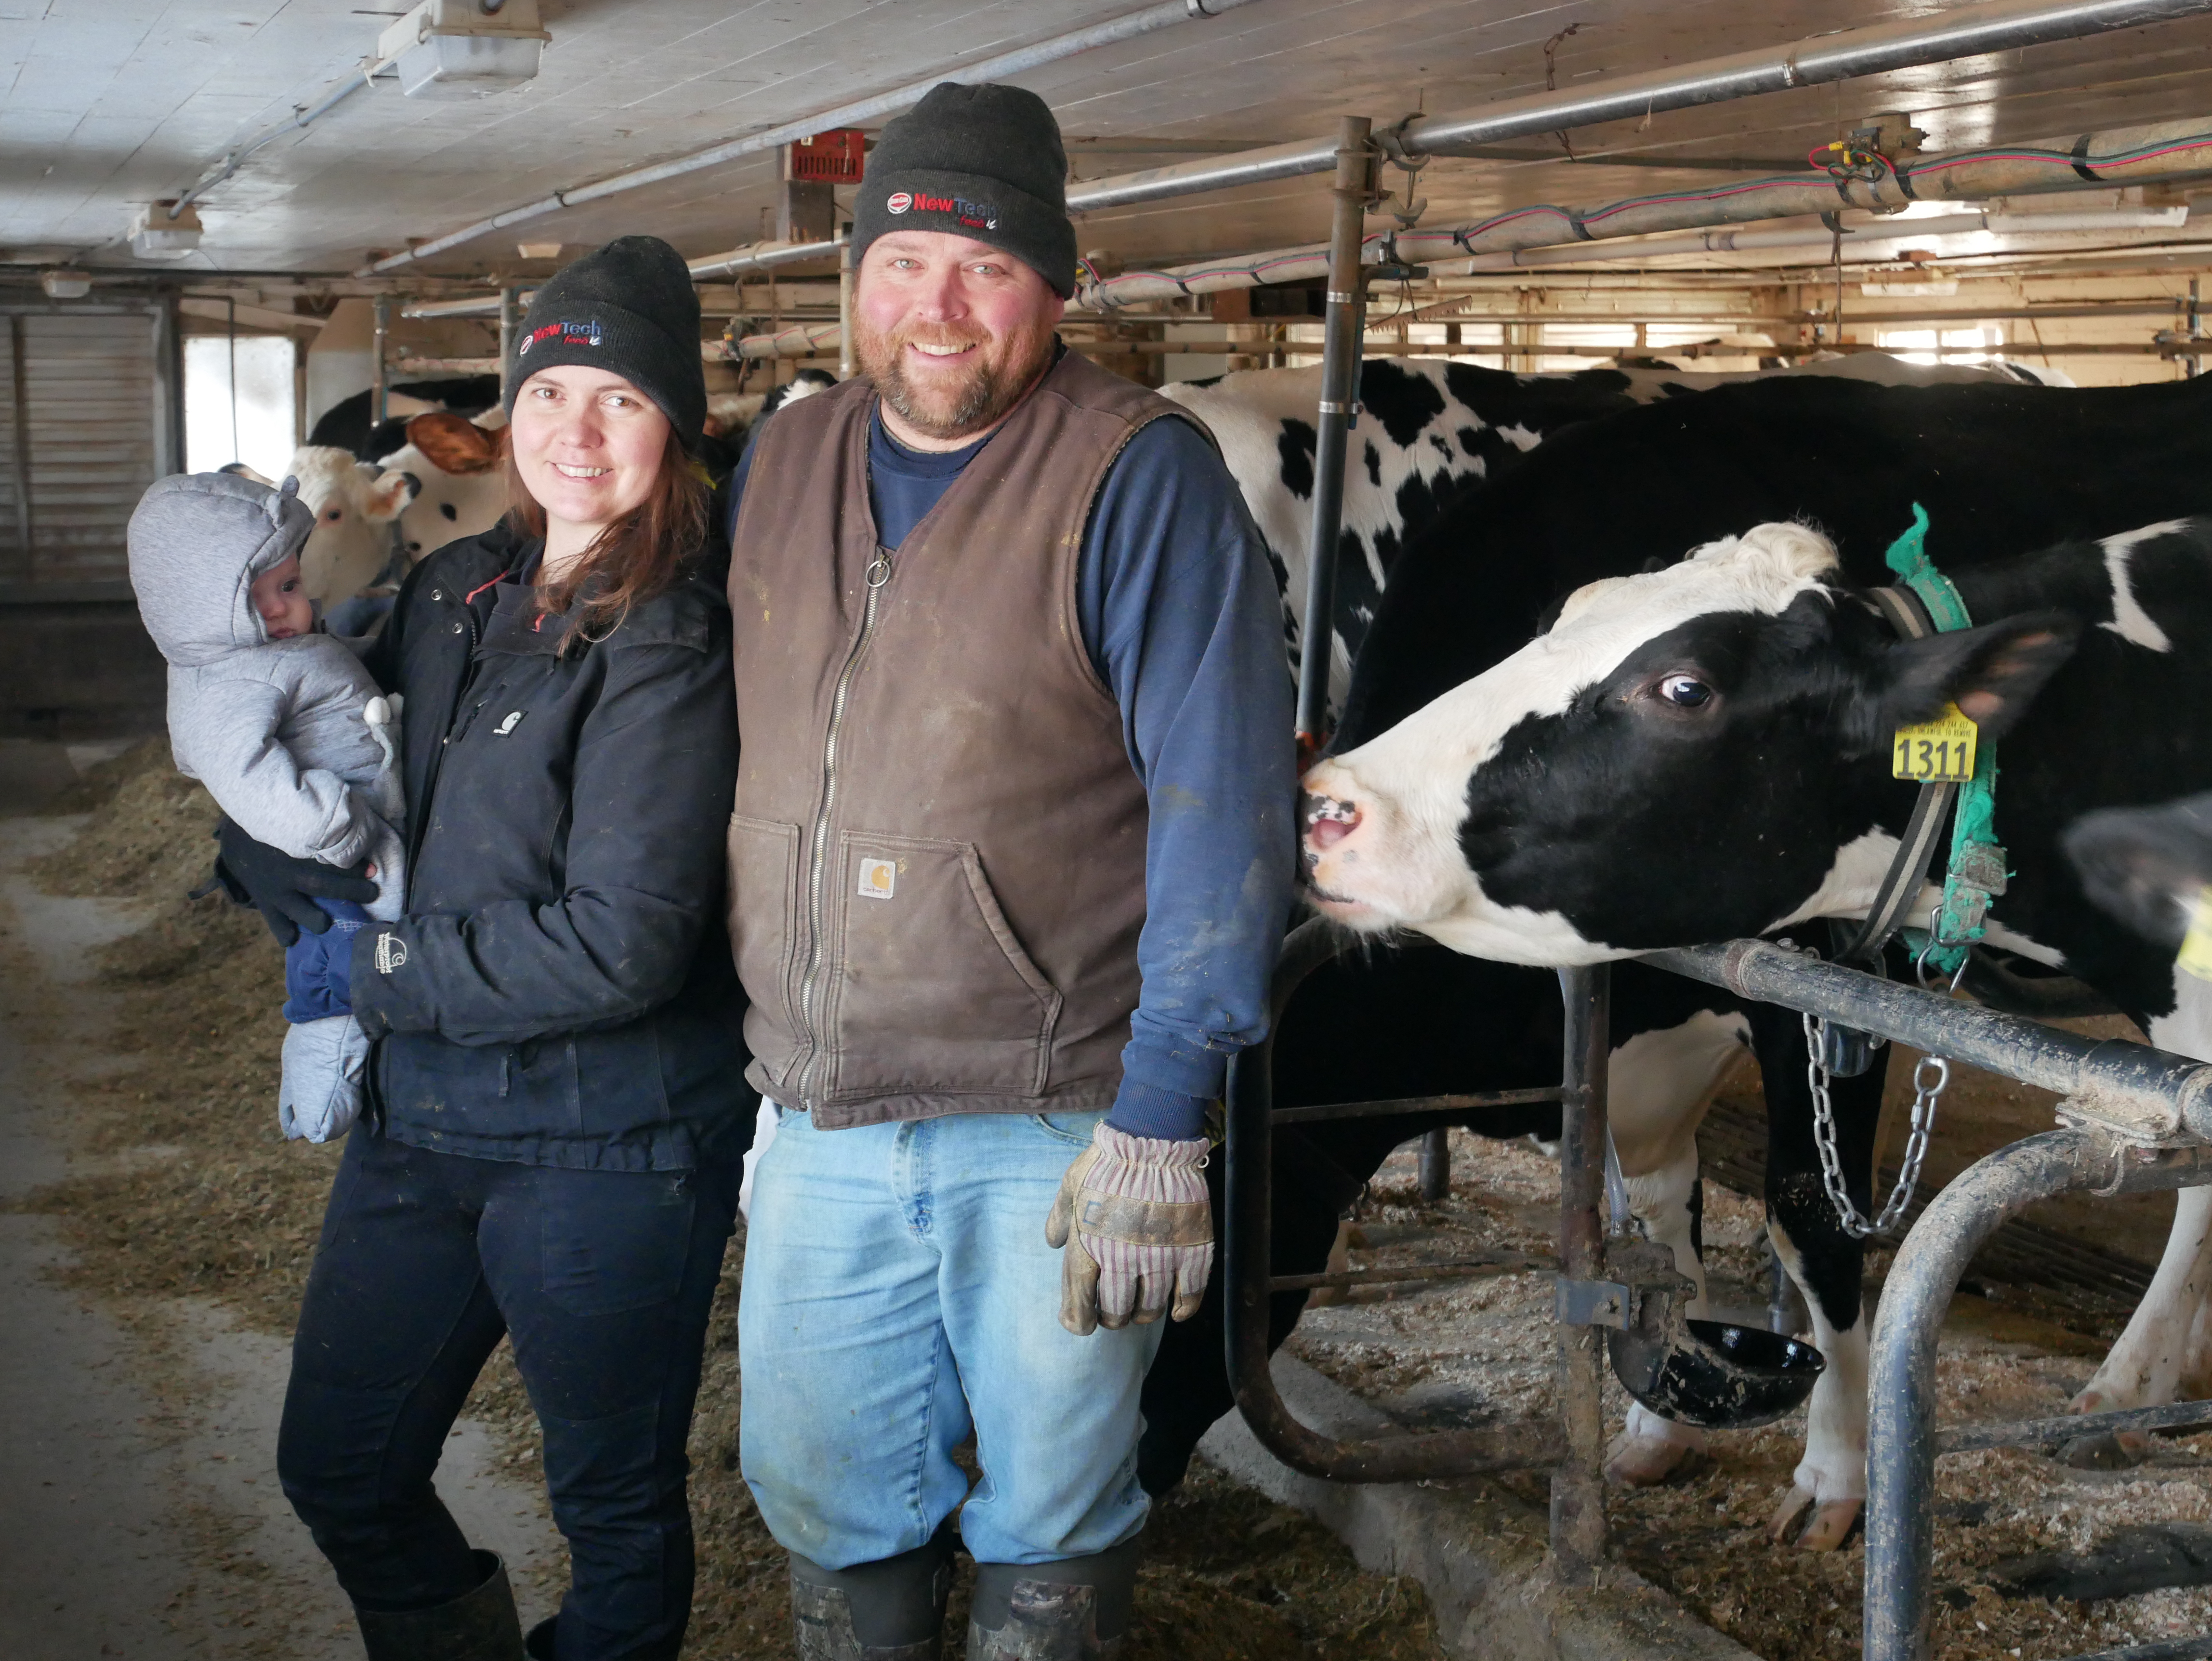 Mary and Elijah stand in a barn in front of dairy cows. May holds a baby.